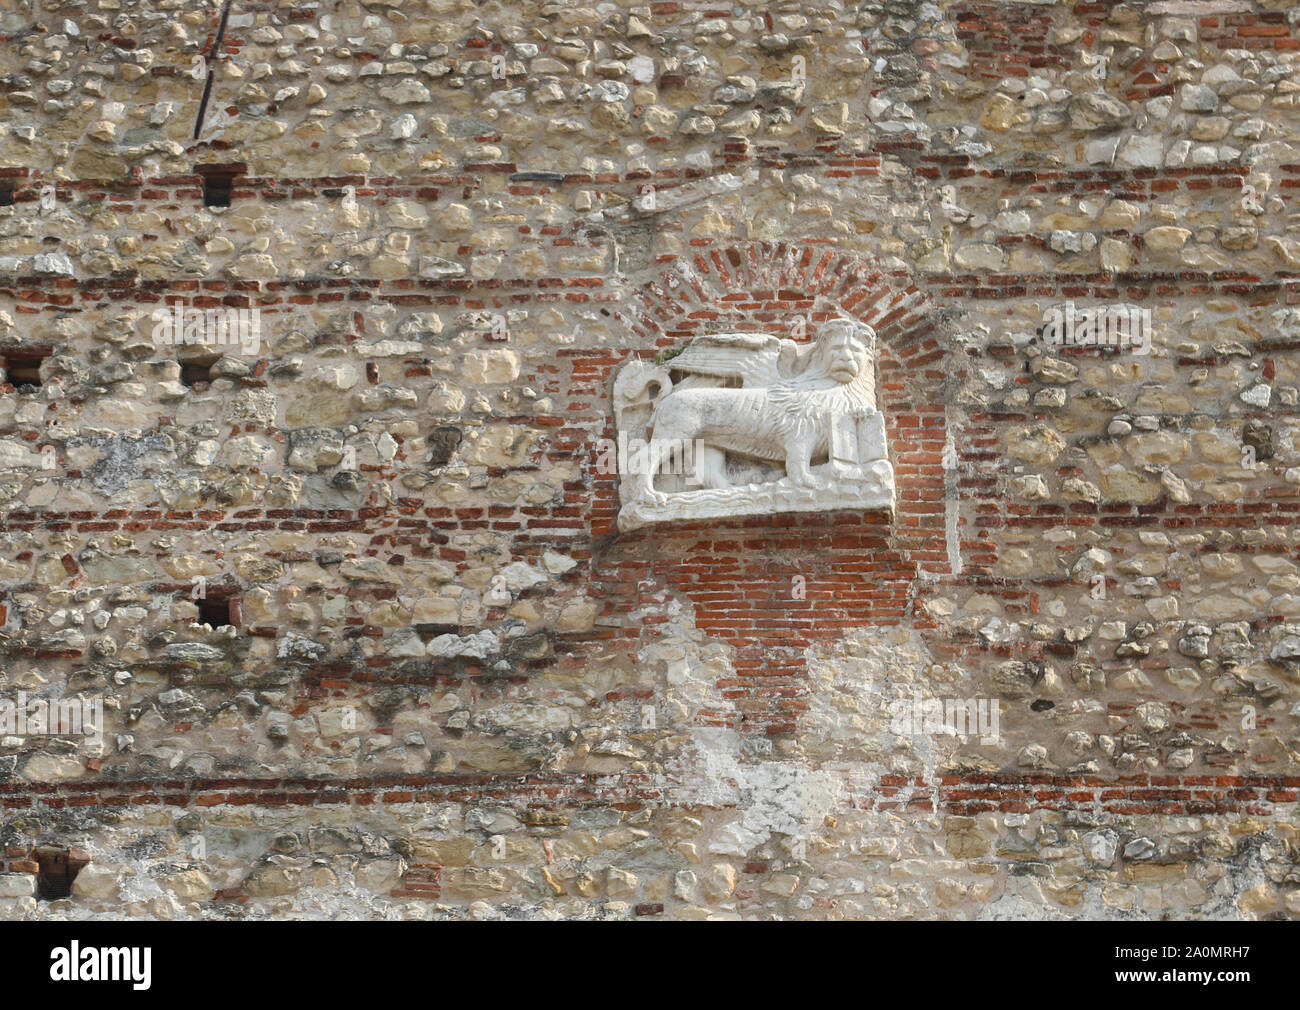 Winged Lion symbol of Repubblica Serenissima of Venice on the wall in Italy Stock Photo